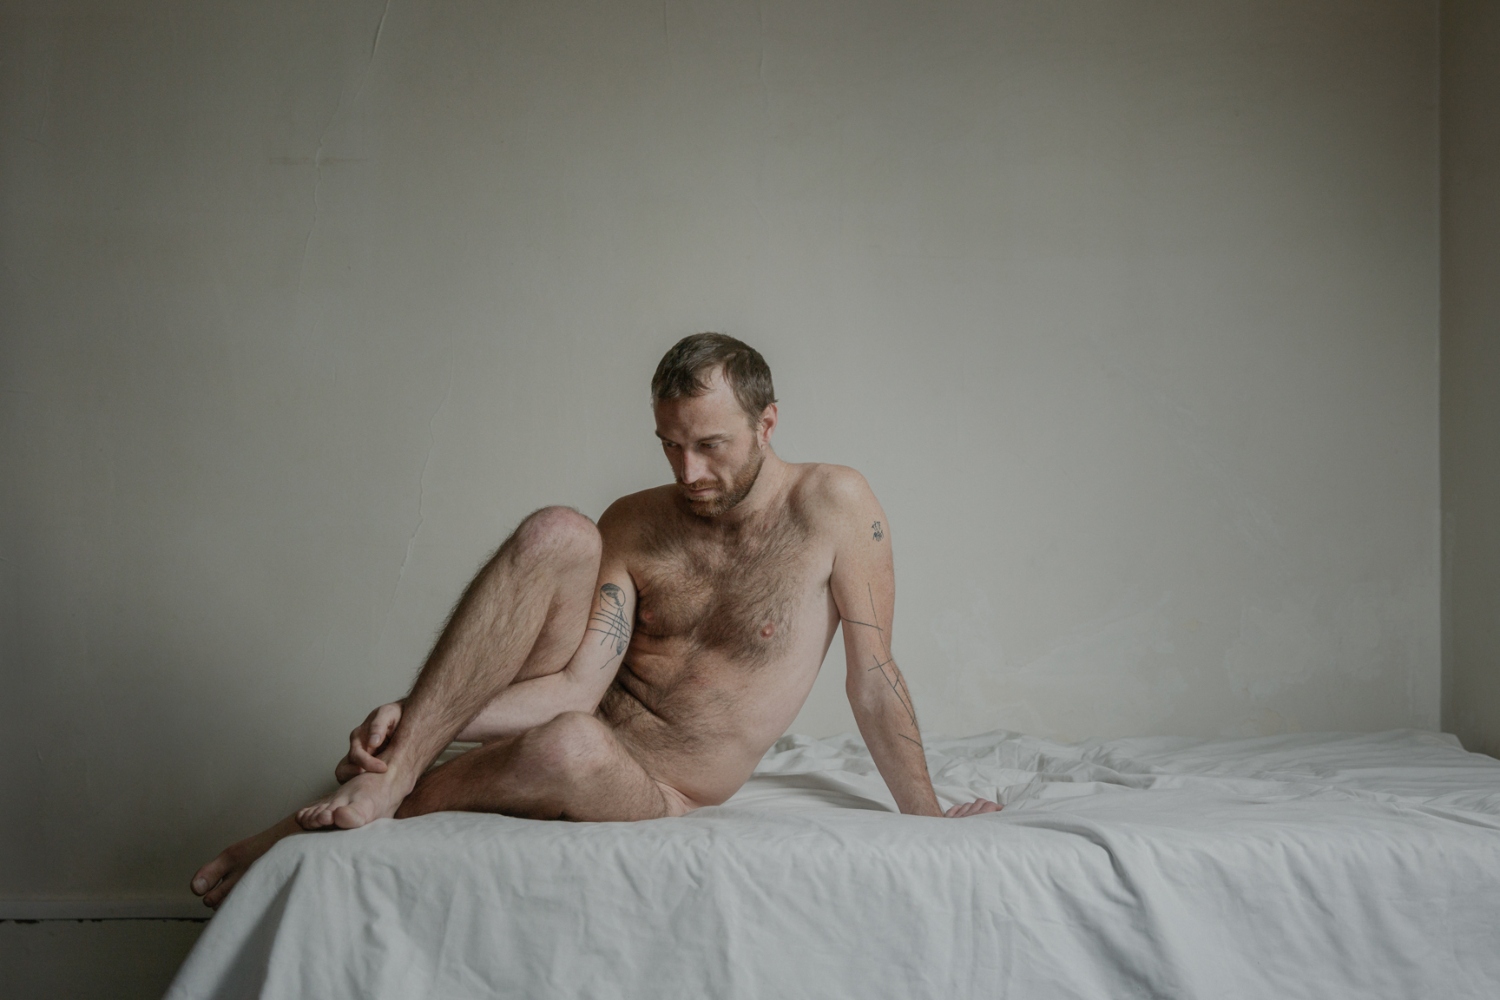 A nude man poses sitting on a white bed for a photo by Laura Stevens